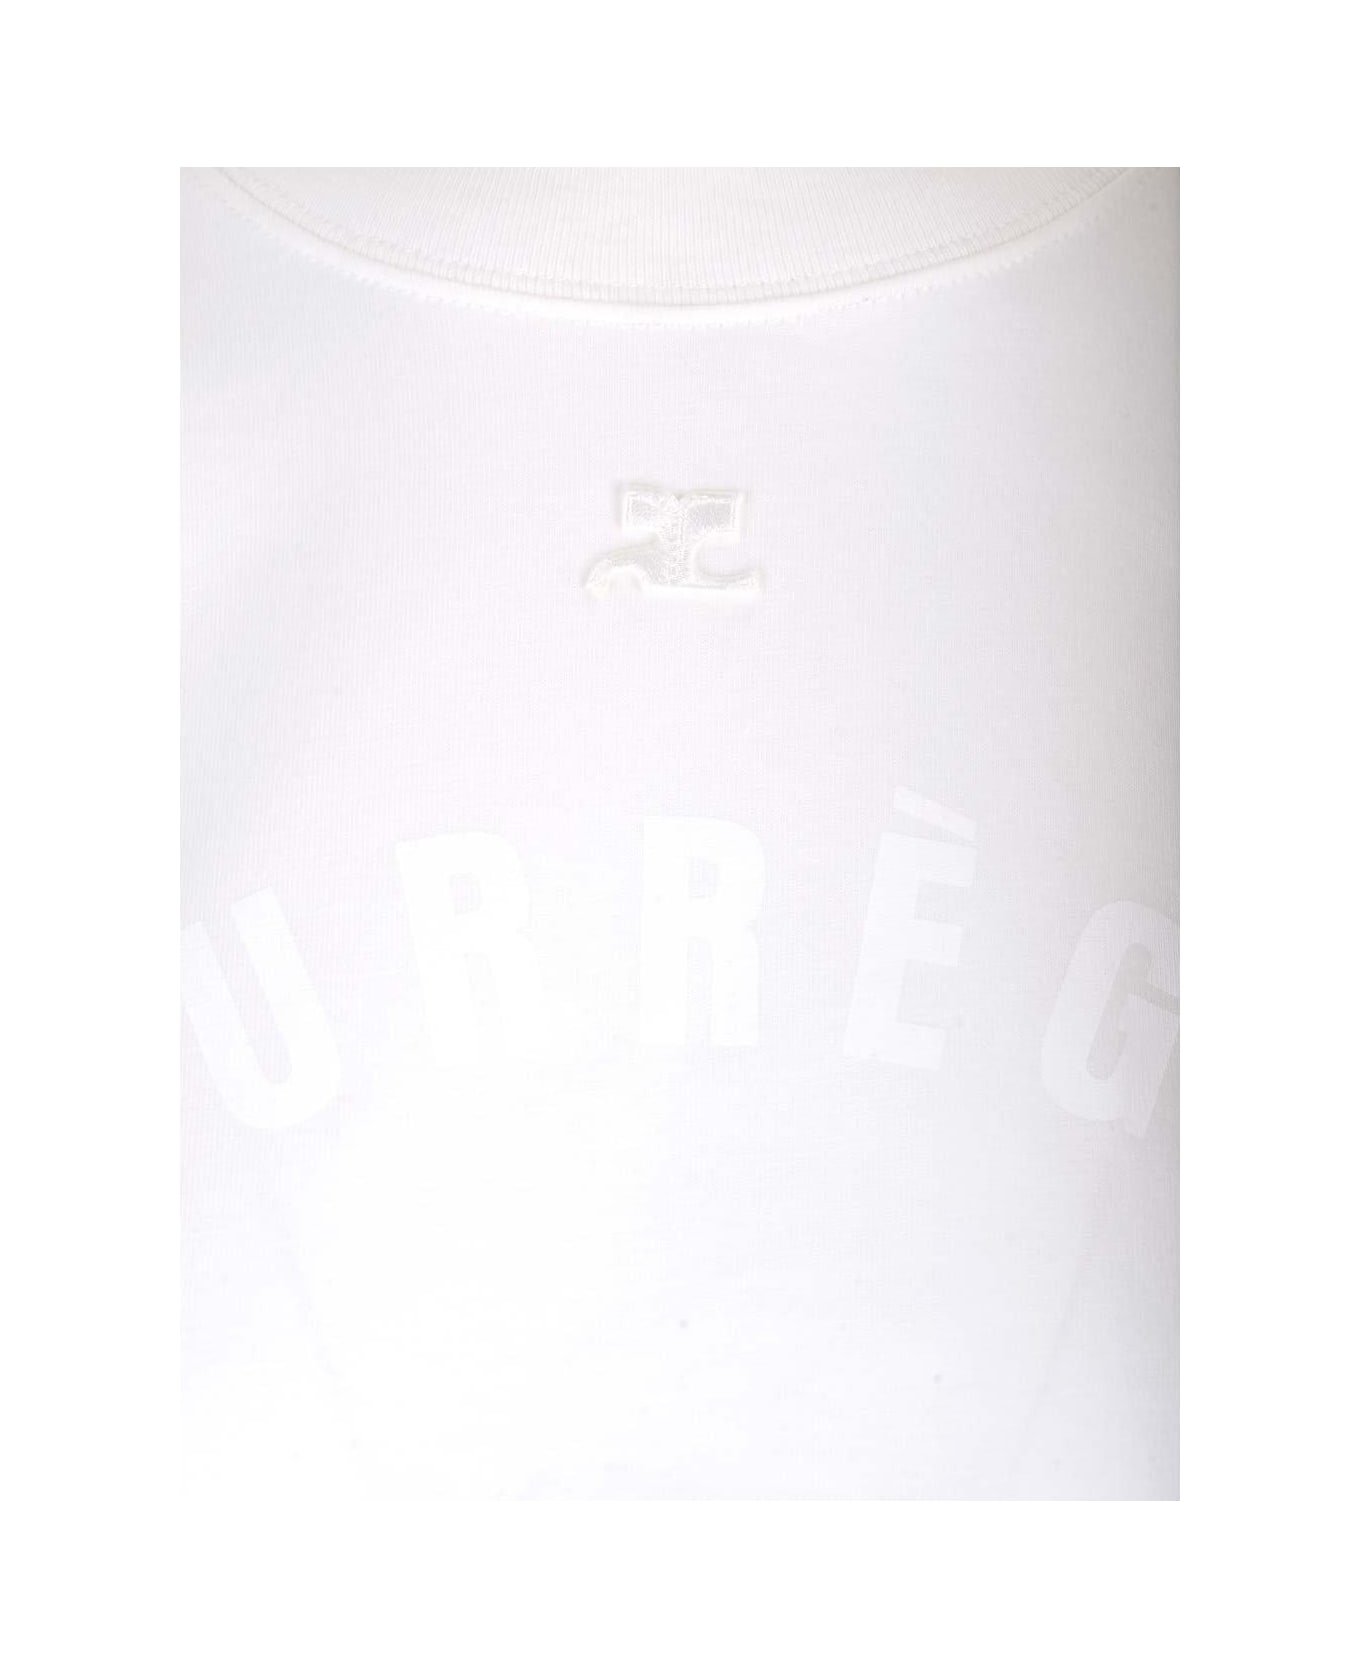 Courrèges Ac Straight Printed T-shirt - White Tシャツ